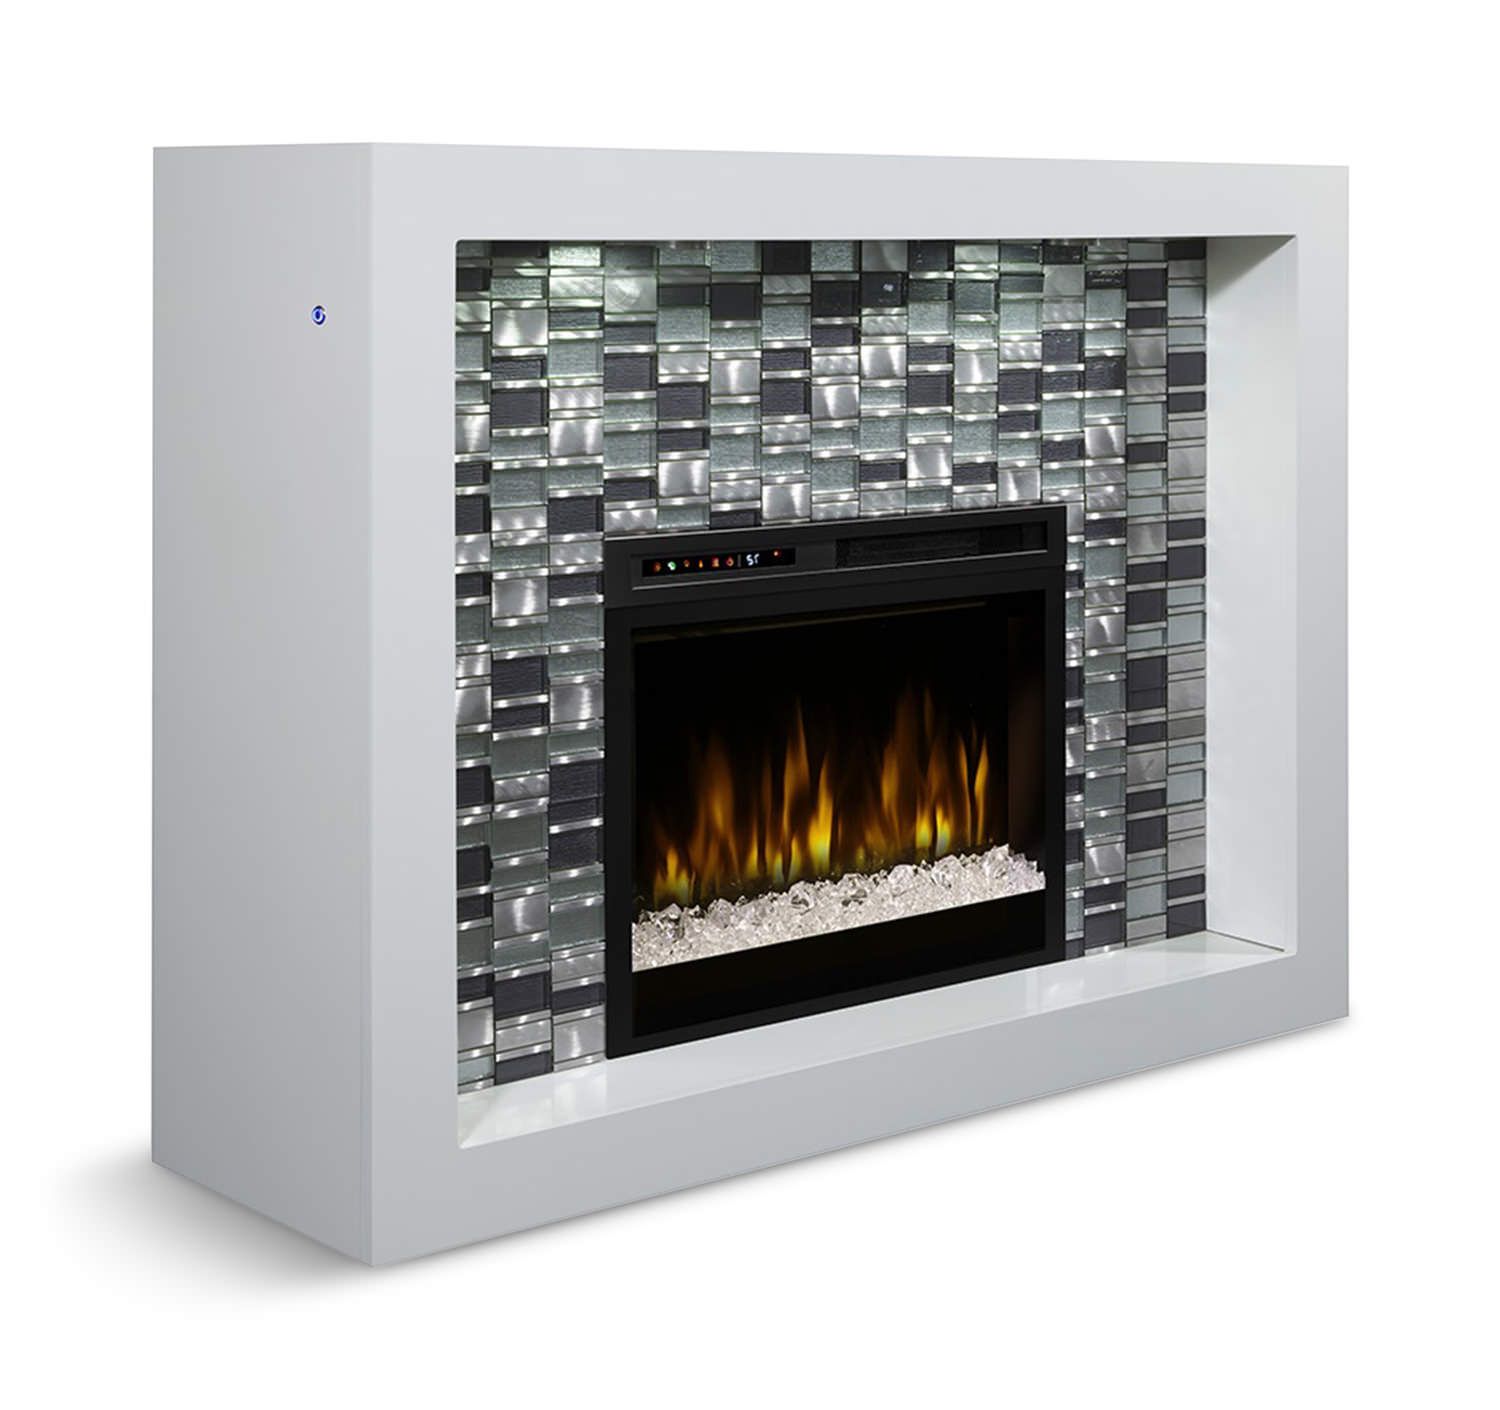 Napoleon Fireplace Insert Luxury Crystal Electric Fireplace Fireplace Focus